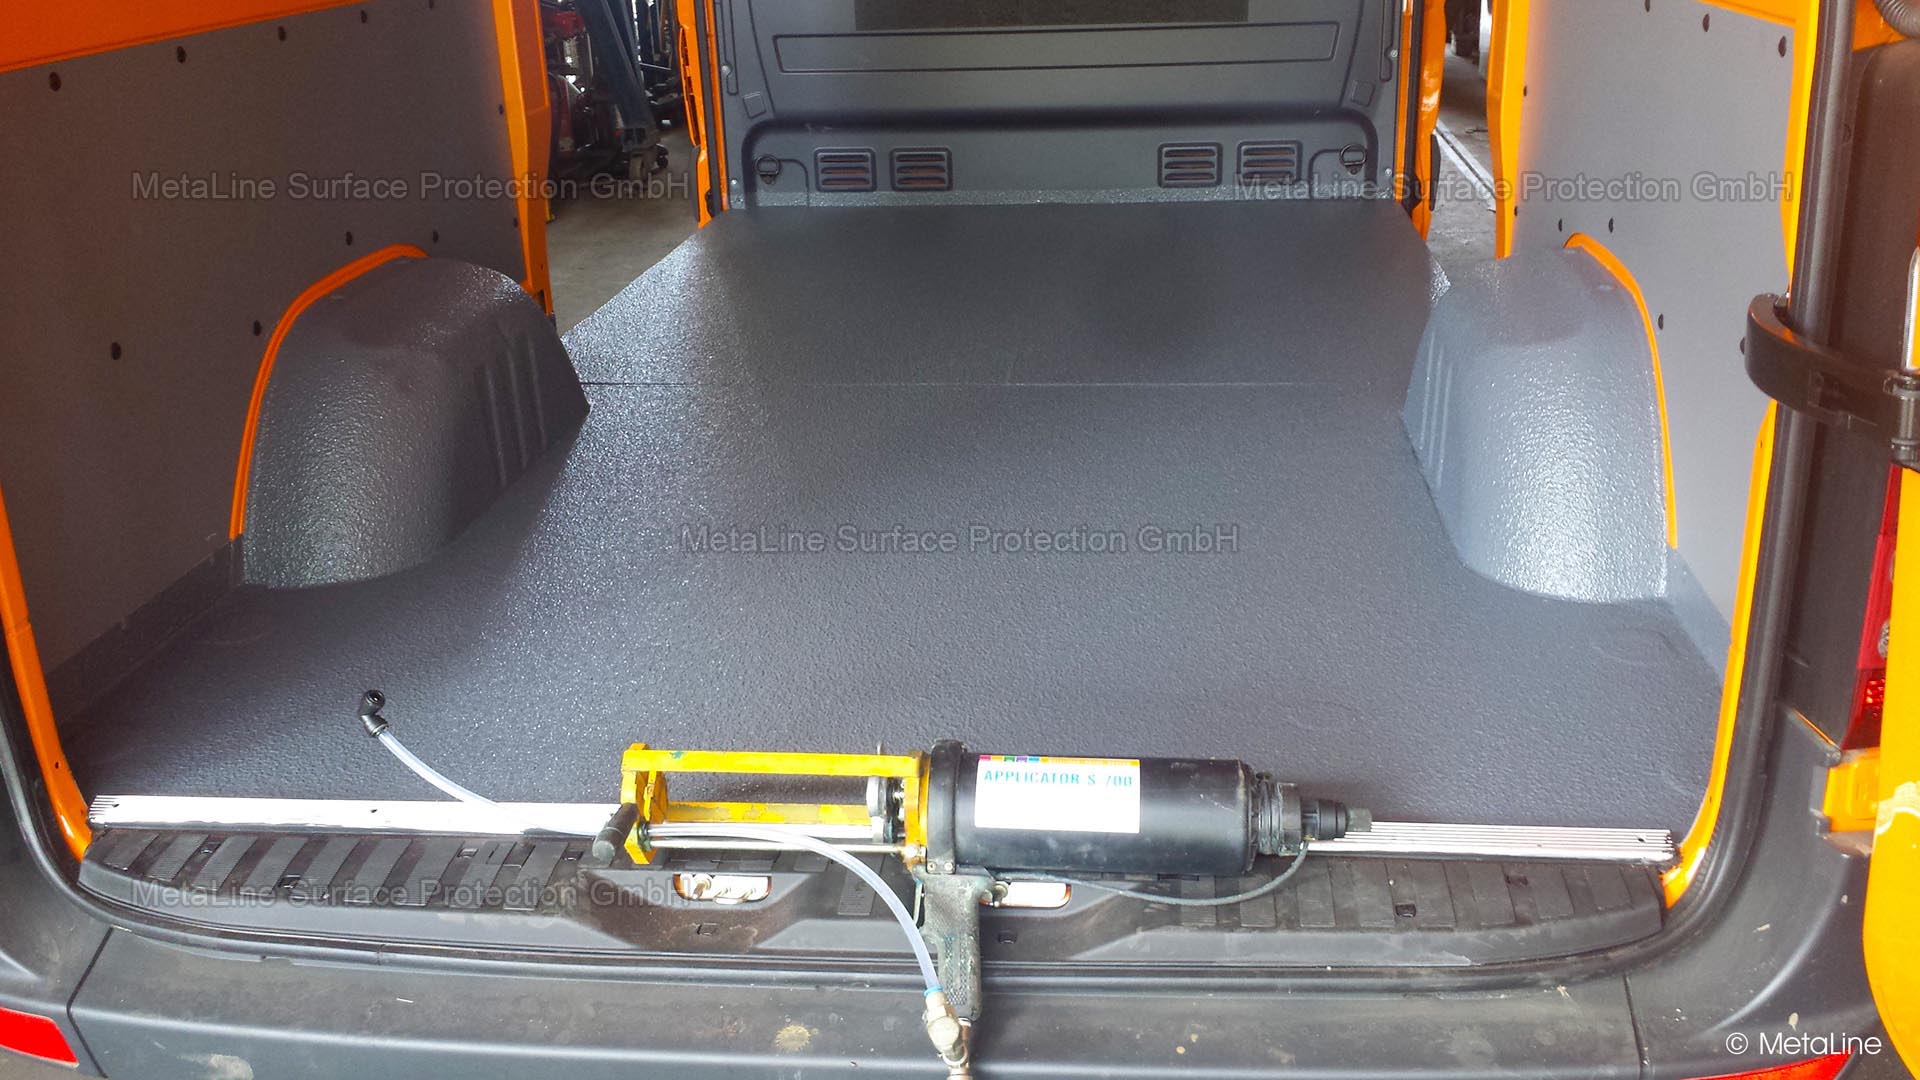 <!-- START: ConditionalContent --><!-- END: ConditionalContent -->   <!-- START: ConditionalContent --> Commercial vehicles; lining; coating; seamless; spraying; hygienic; PU; decorative; resilient; FDA; food safe; load securing; anti-slip; waterproof; elastic; cleanable; sprinter; transporter; loading area; interior; anti-stick; cargo area; anti-stick <!-- END: ConditionalContent -->   <!-- START: ConditionalContent --><!-- END: ConditionalContent -->   <!-- START: ConditionalContent --><!-- END: ConditionalContent -->